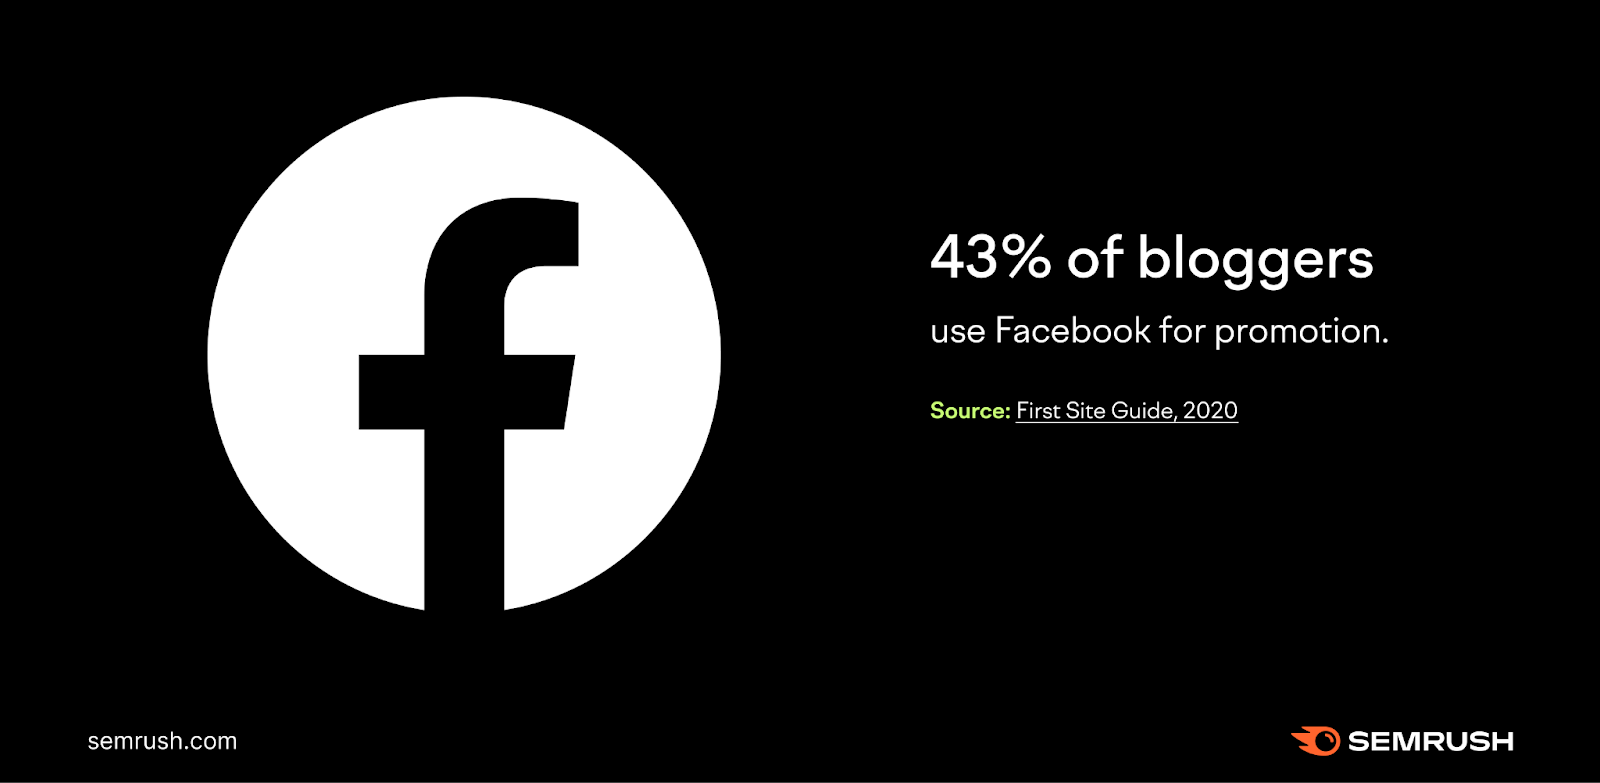 43% of bloggers use Facebook for promotion.